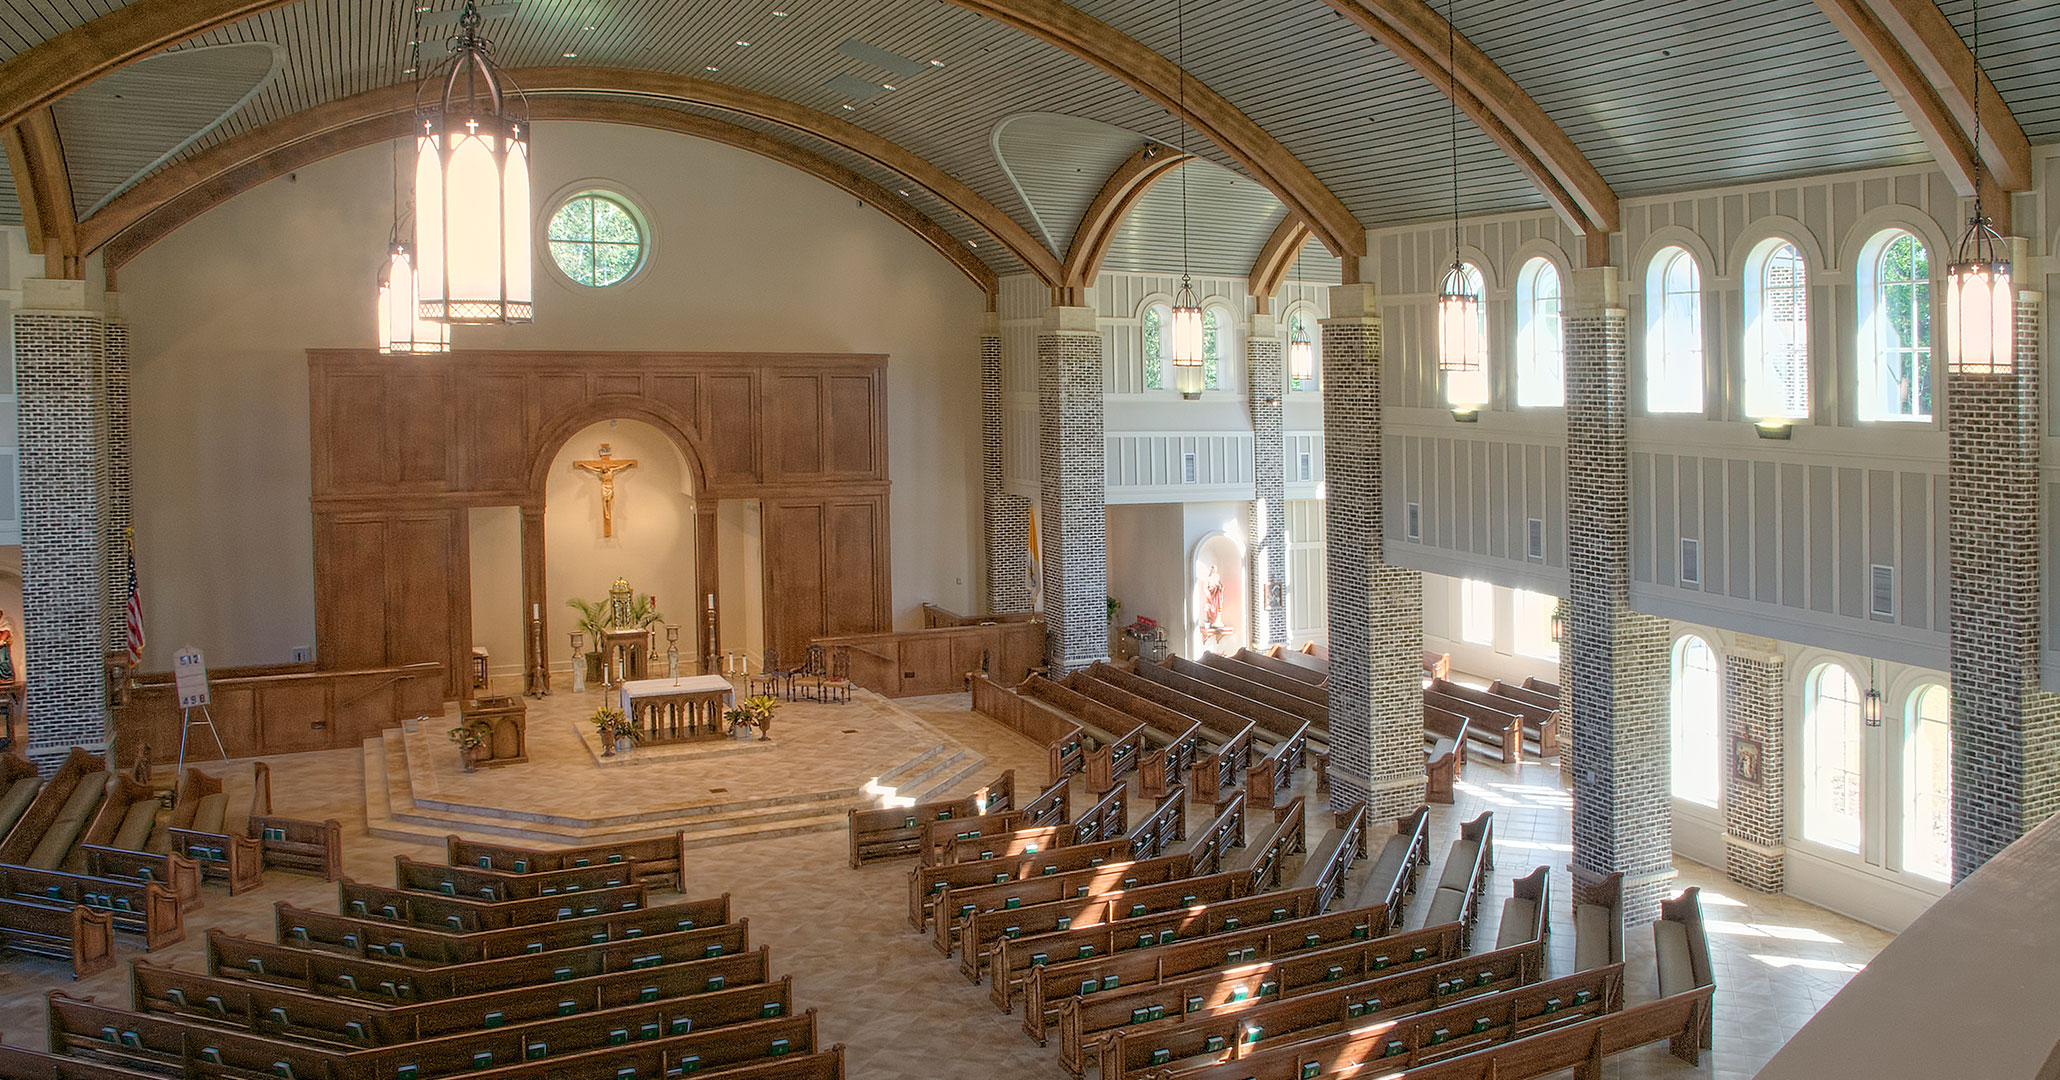 St. Anne in Richmond Hill, GA to expanded their current church footprint using Boudreaux architects.